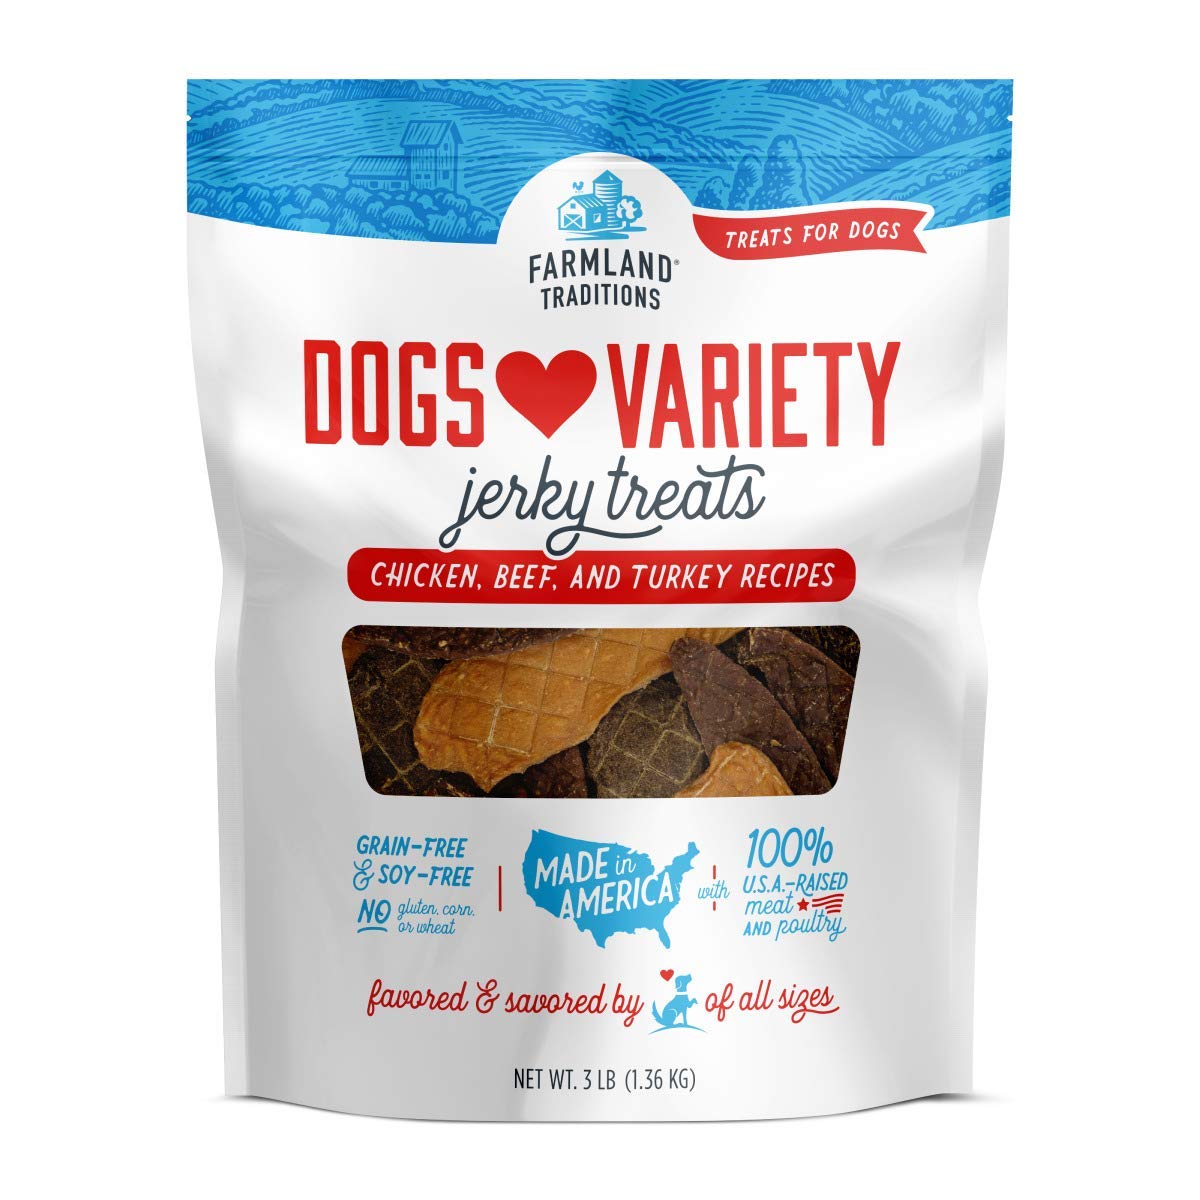 Farmland Traditions Filler Free Dogs Love Variety Premium Jerky Treats for Dogs chicken Beef & Turkey 3 lb. Bag